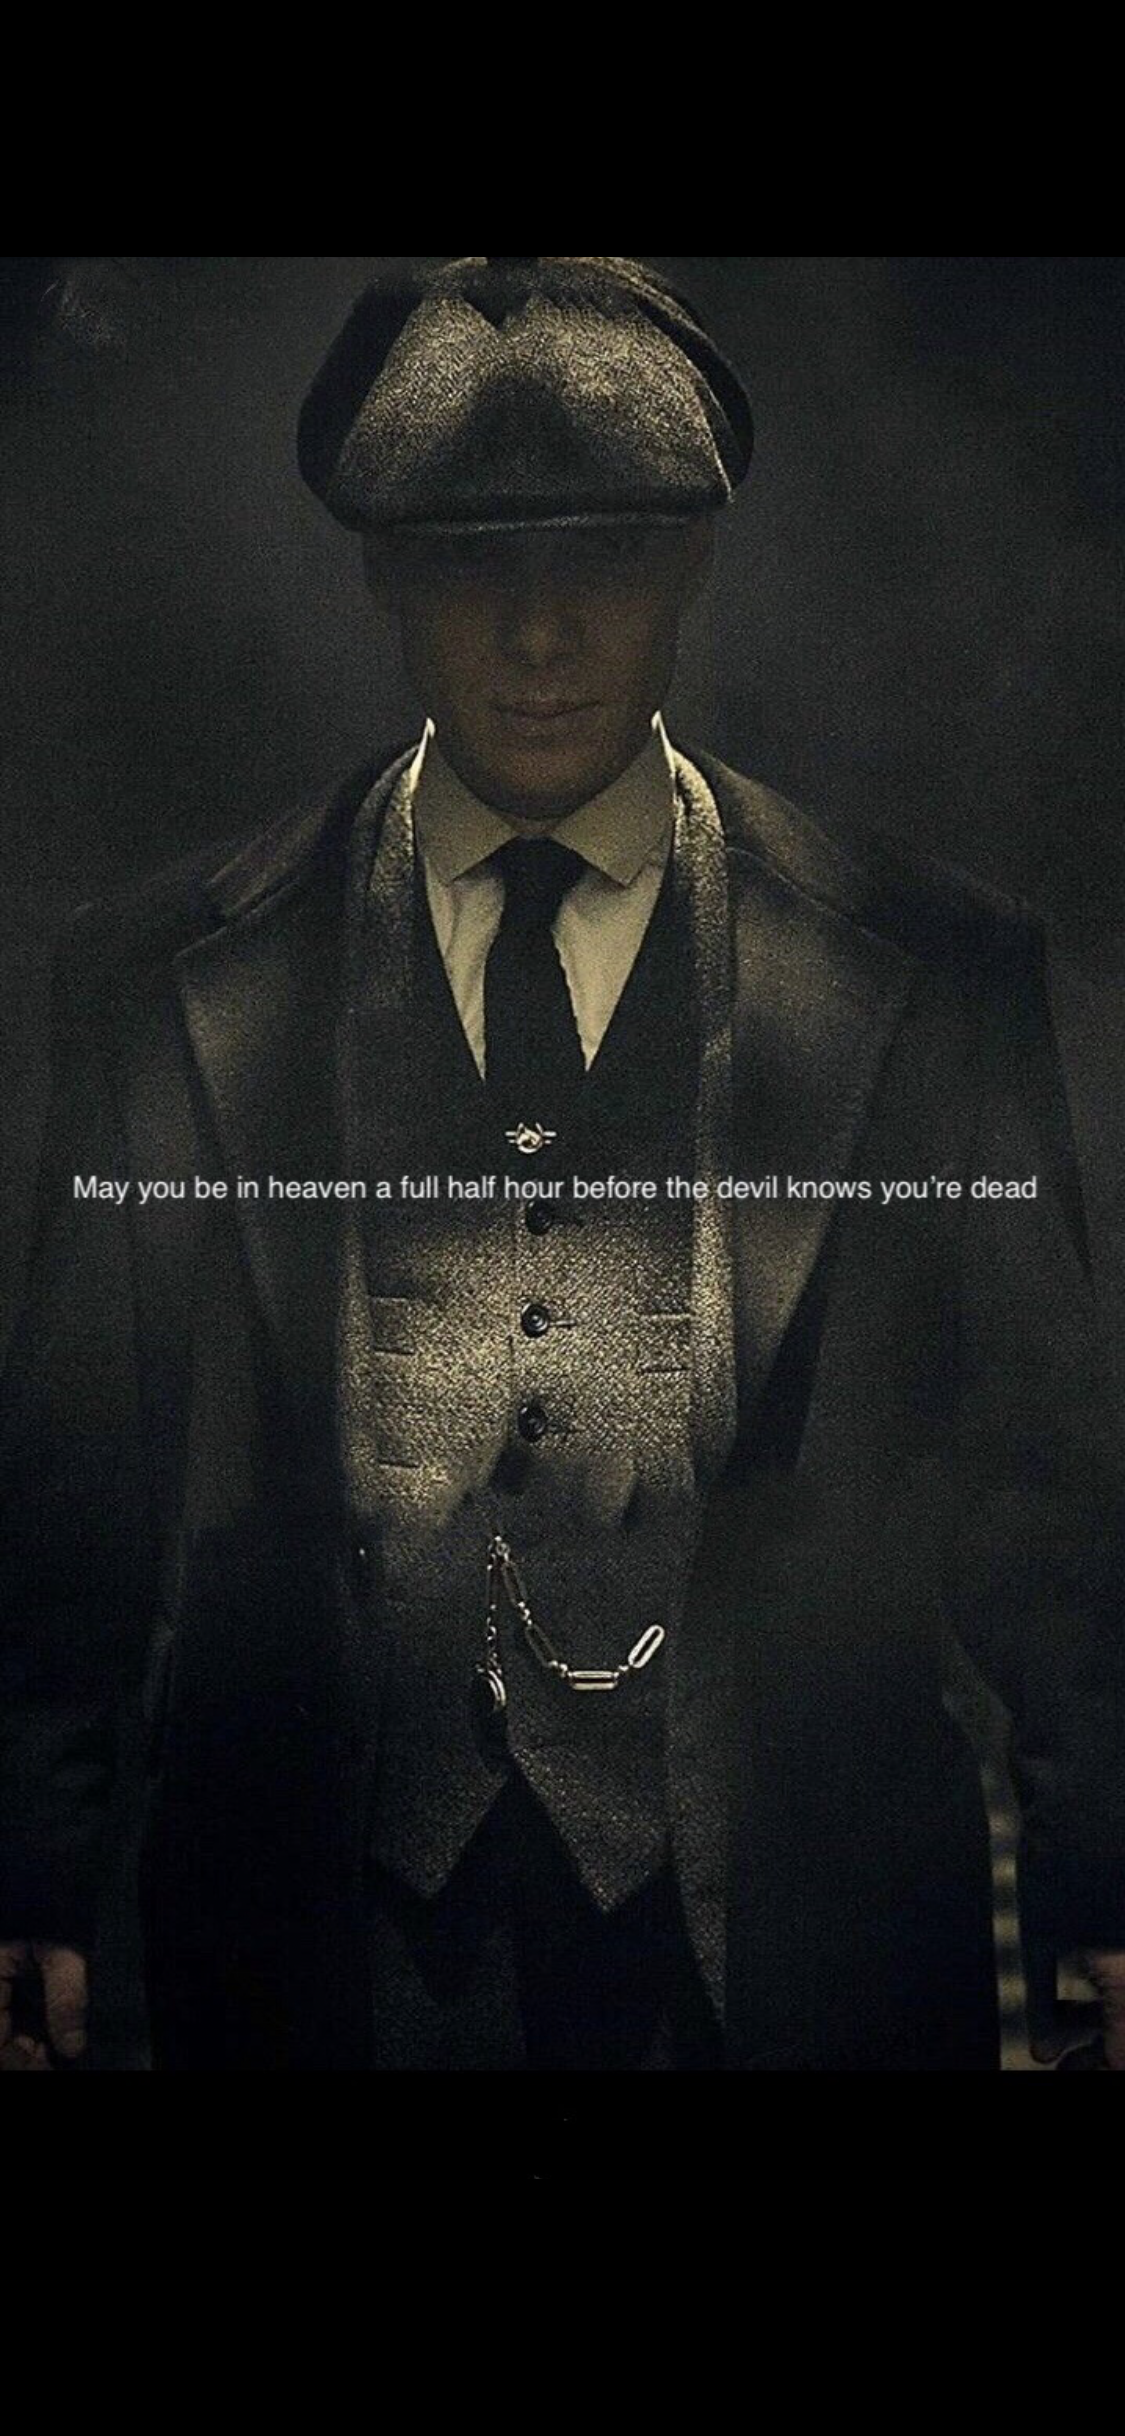 By order of the Peaky F*cking Blinders